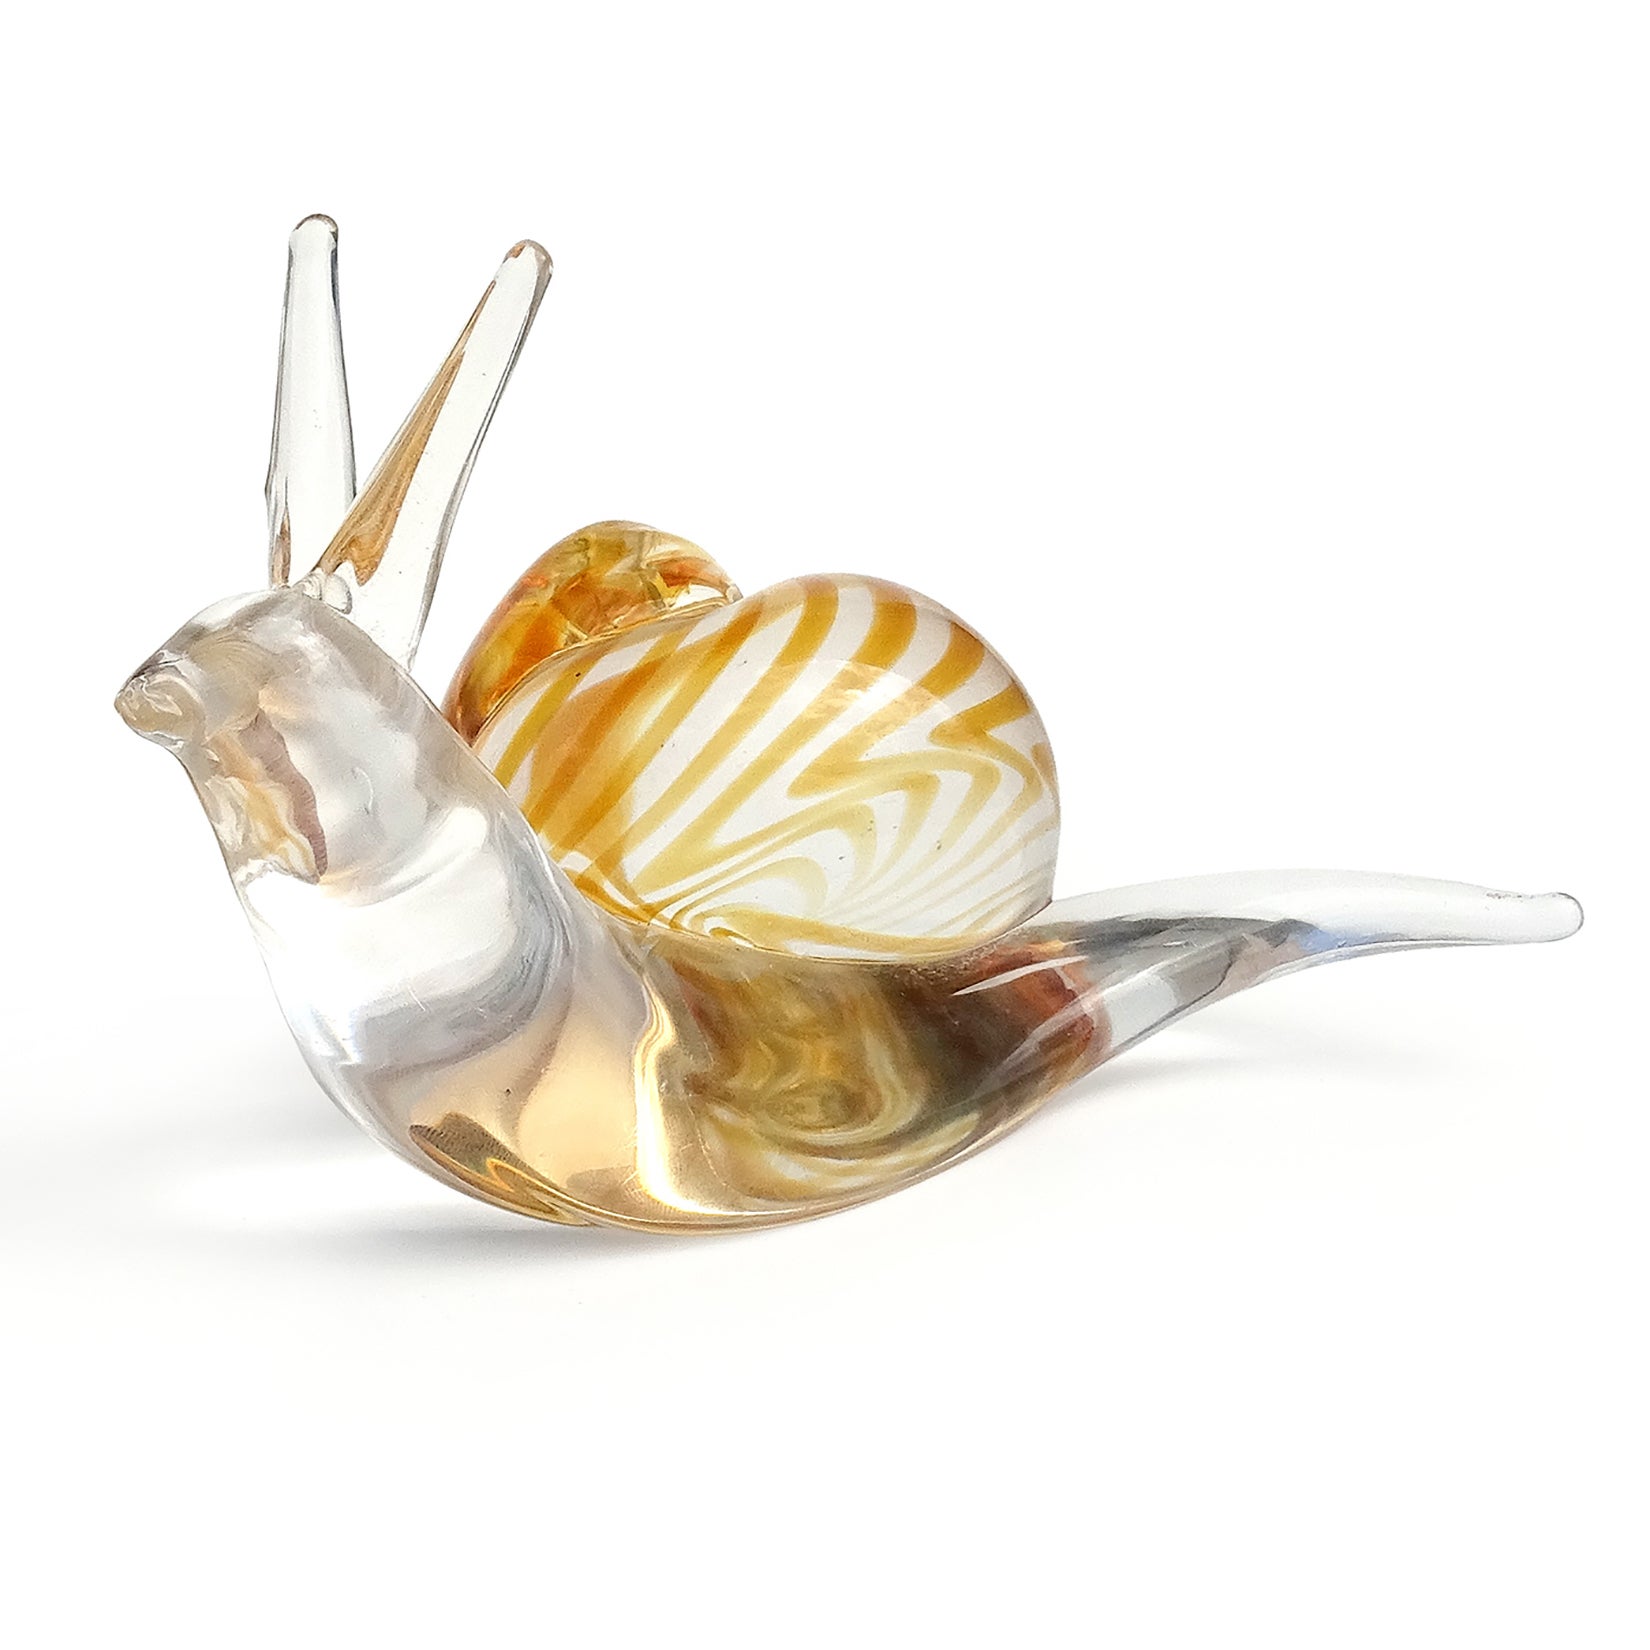 Beautiful, vintage Murano clear glass and orange swirl seashell Italian art glass snail sculpture / paperweight. Created in the manner of the Salviati company, and documented to the Oggetti company. The snail is super realistic, with a long neck and